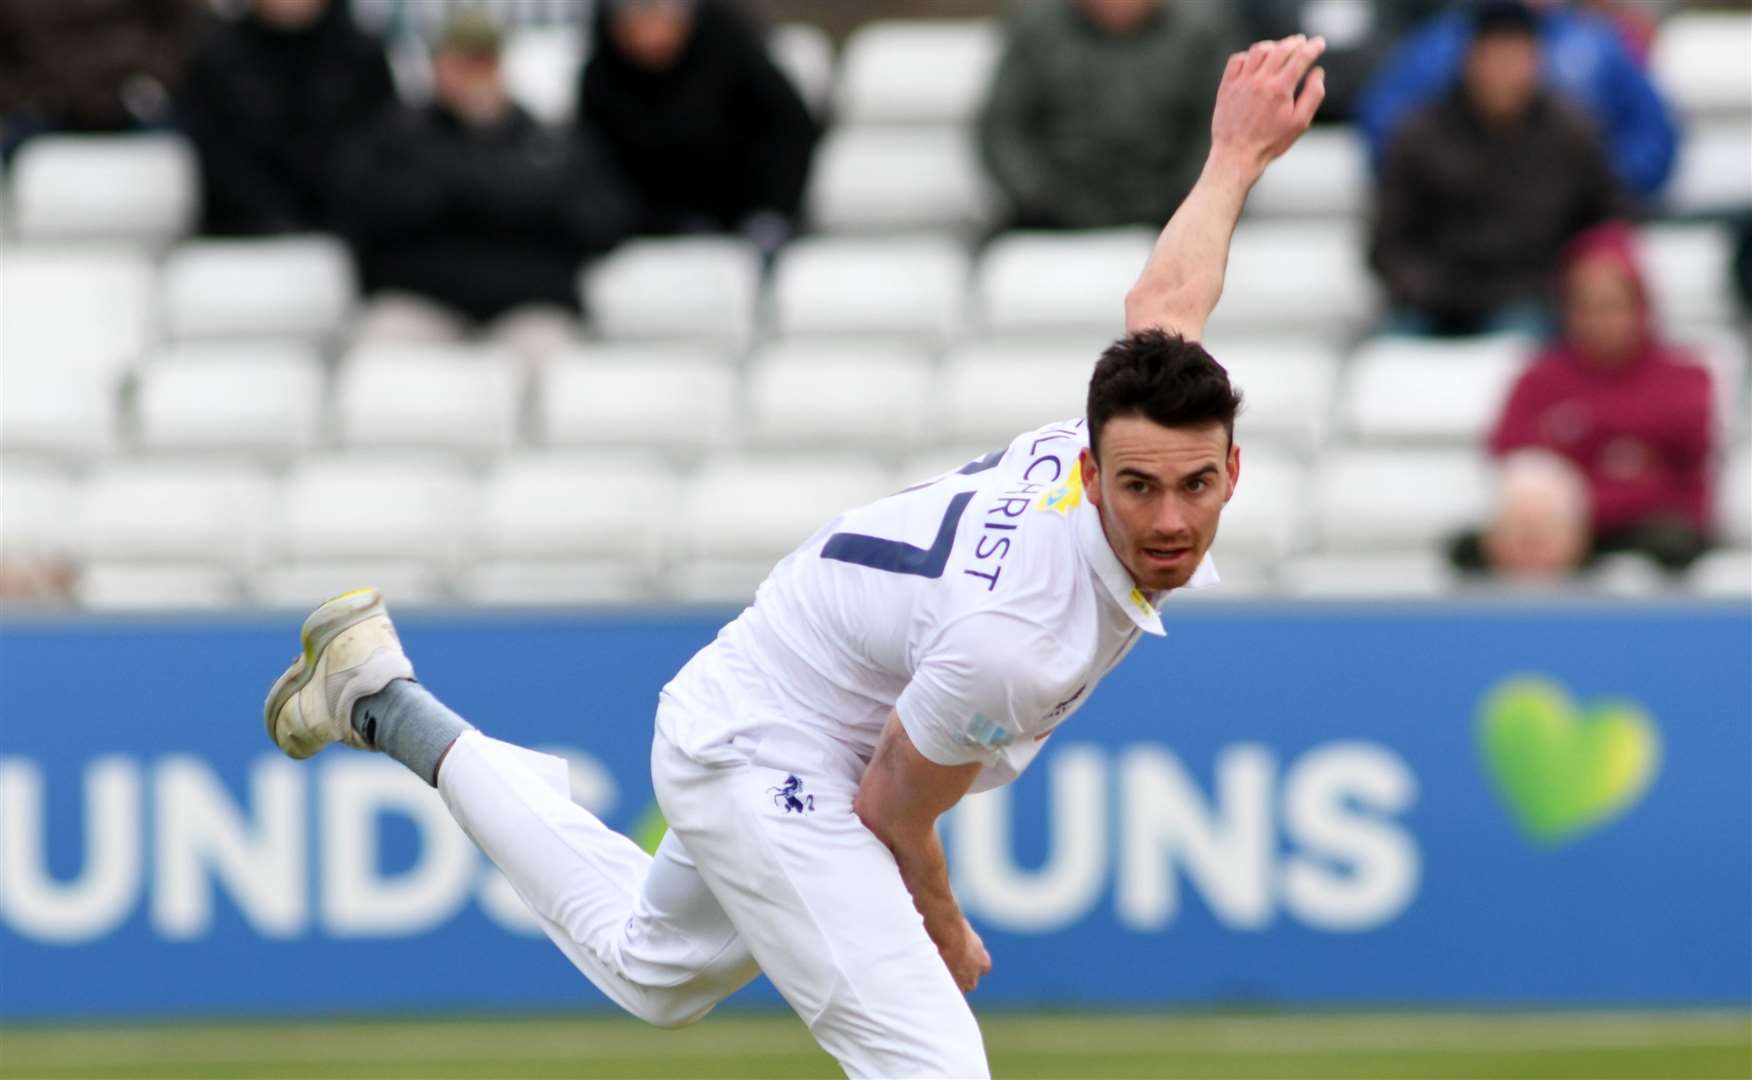 Nathan Gilchrist - took two early wickets, including Sri Lanka captain Dimuth Karunaratne. Picture: Barry Goodwin